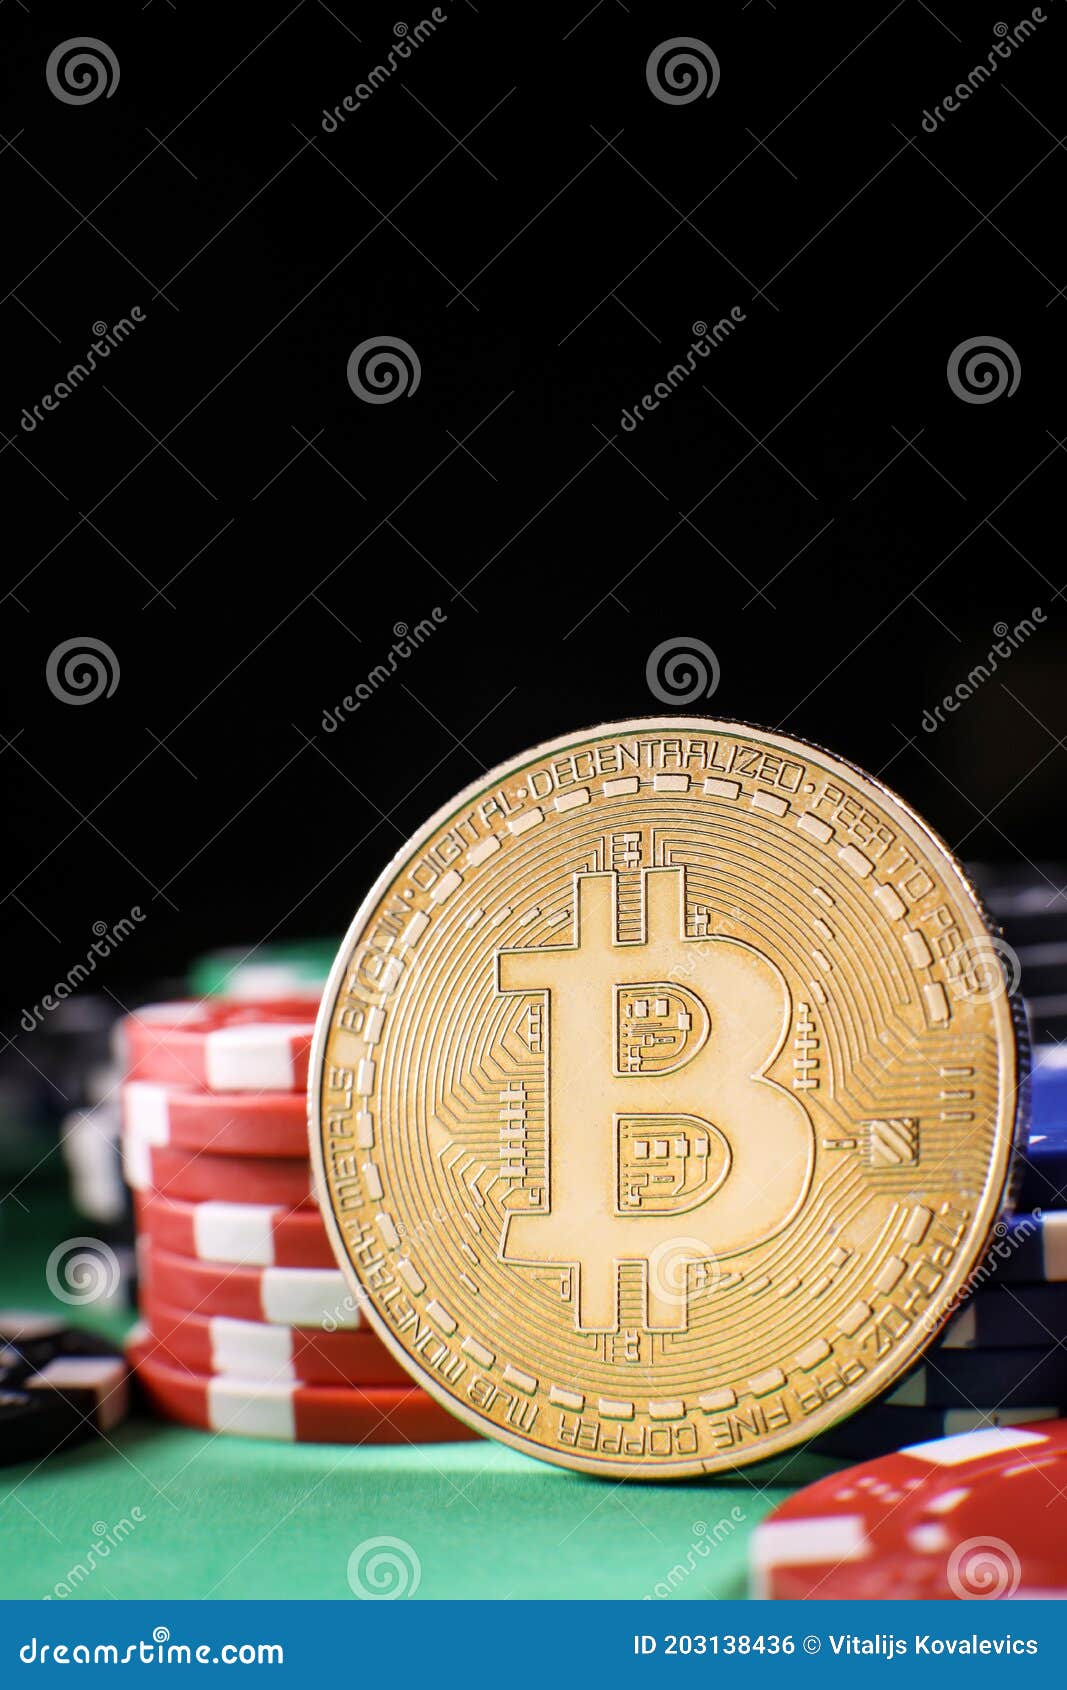 What Is btc casino and How Does It Work?